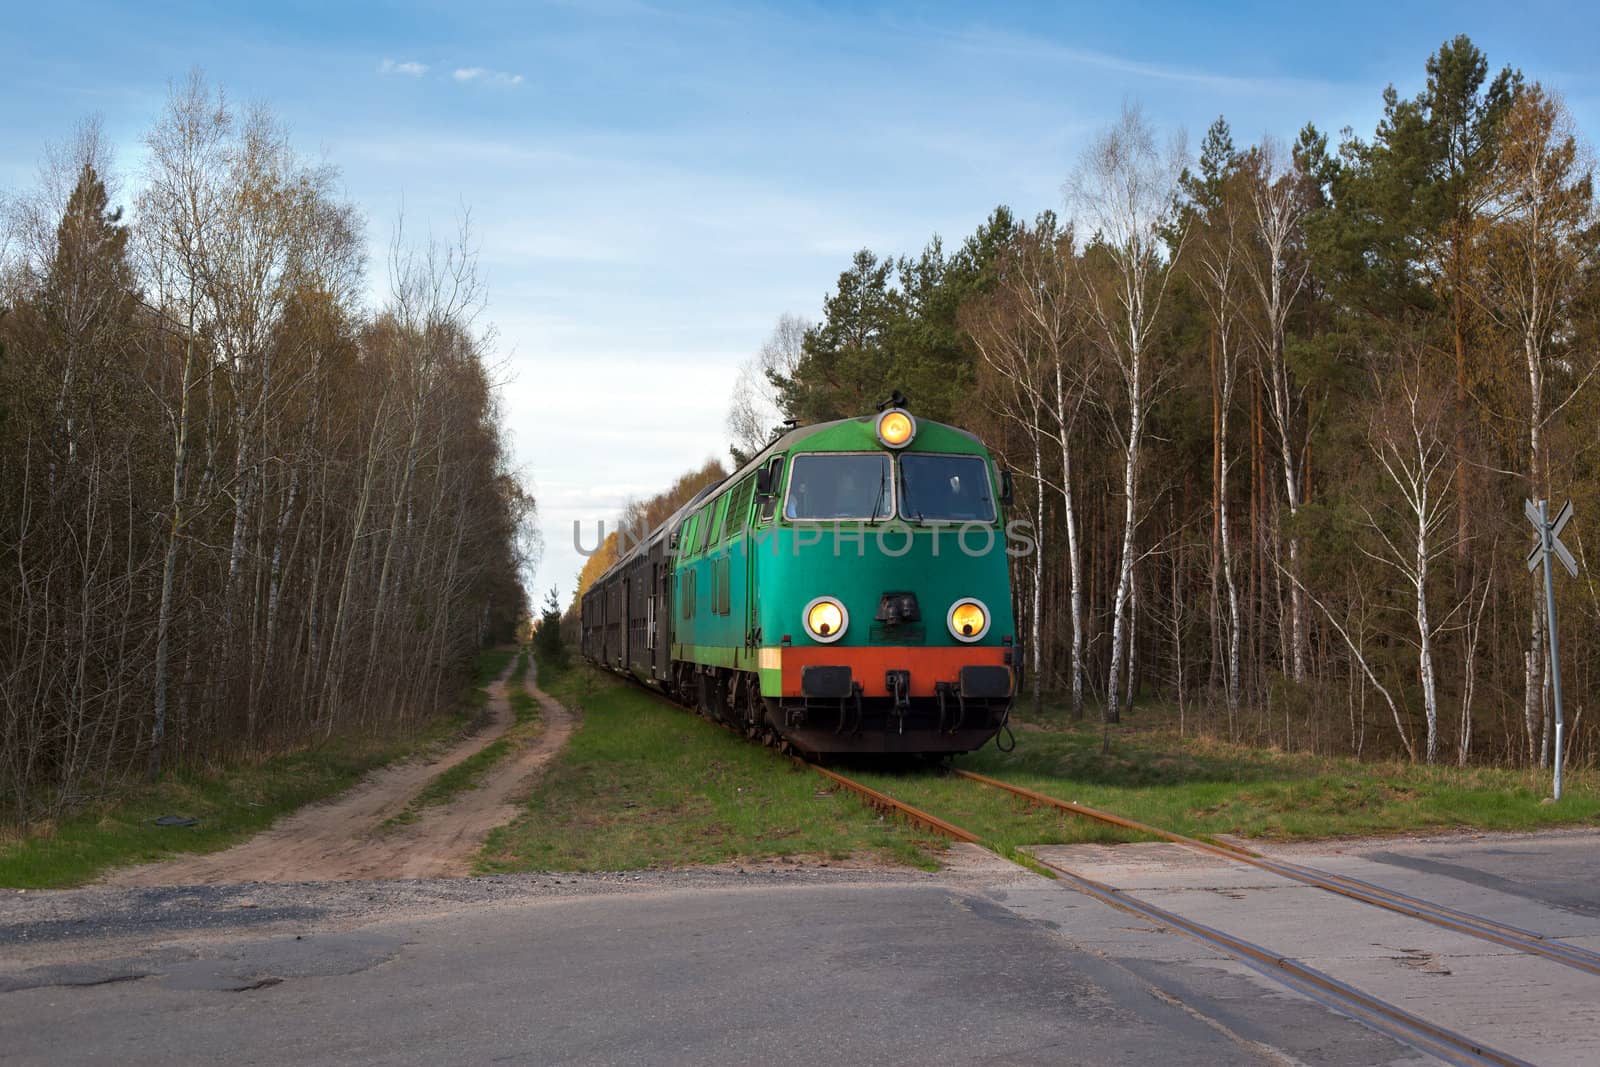 Passenger train passing through the forest by remik44992